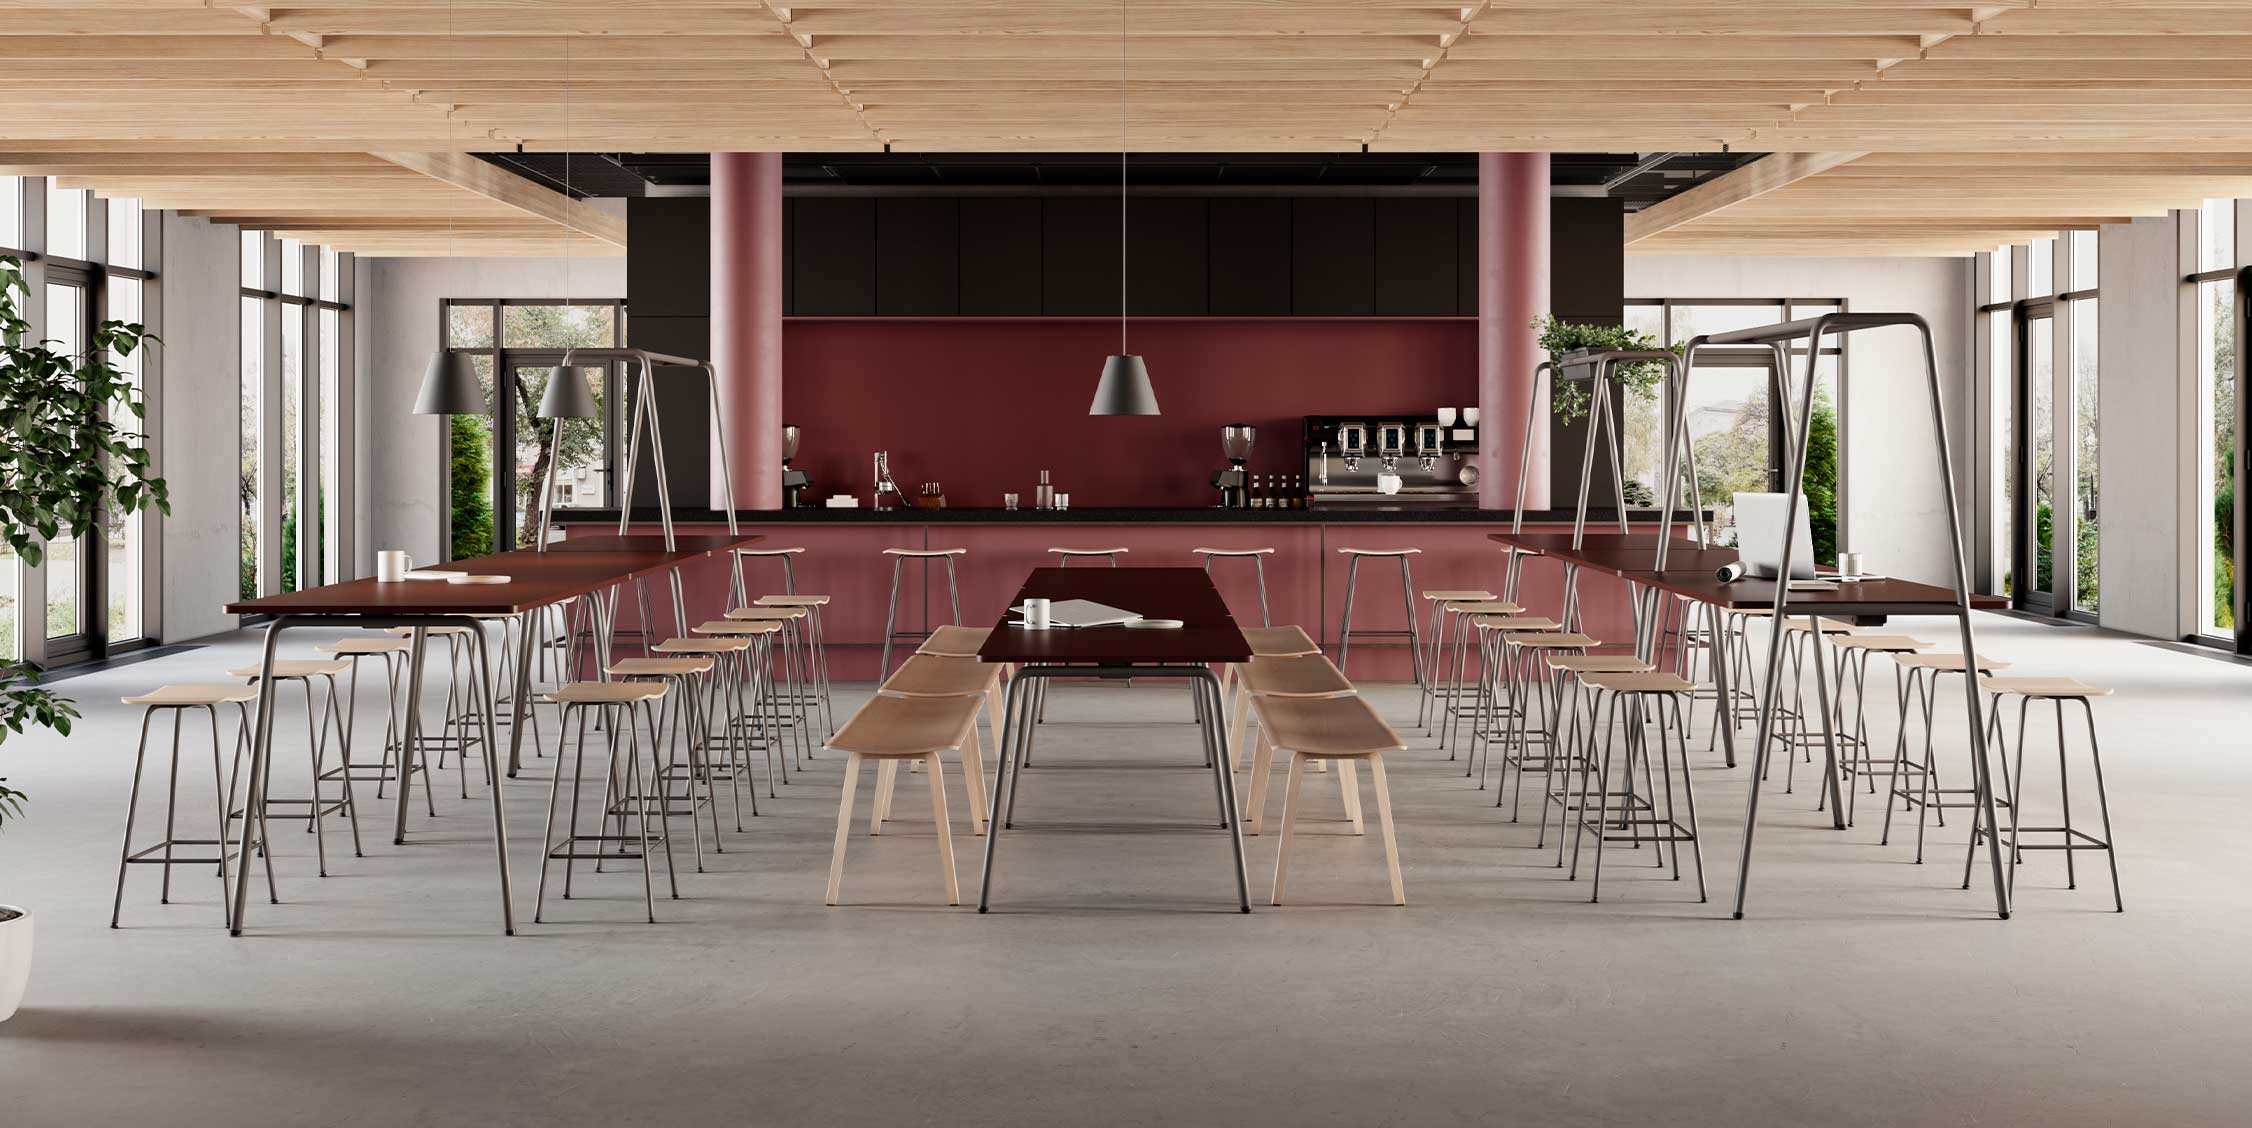 Canteen furniture in a dining room with a long table, community tables and chairs.